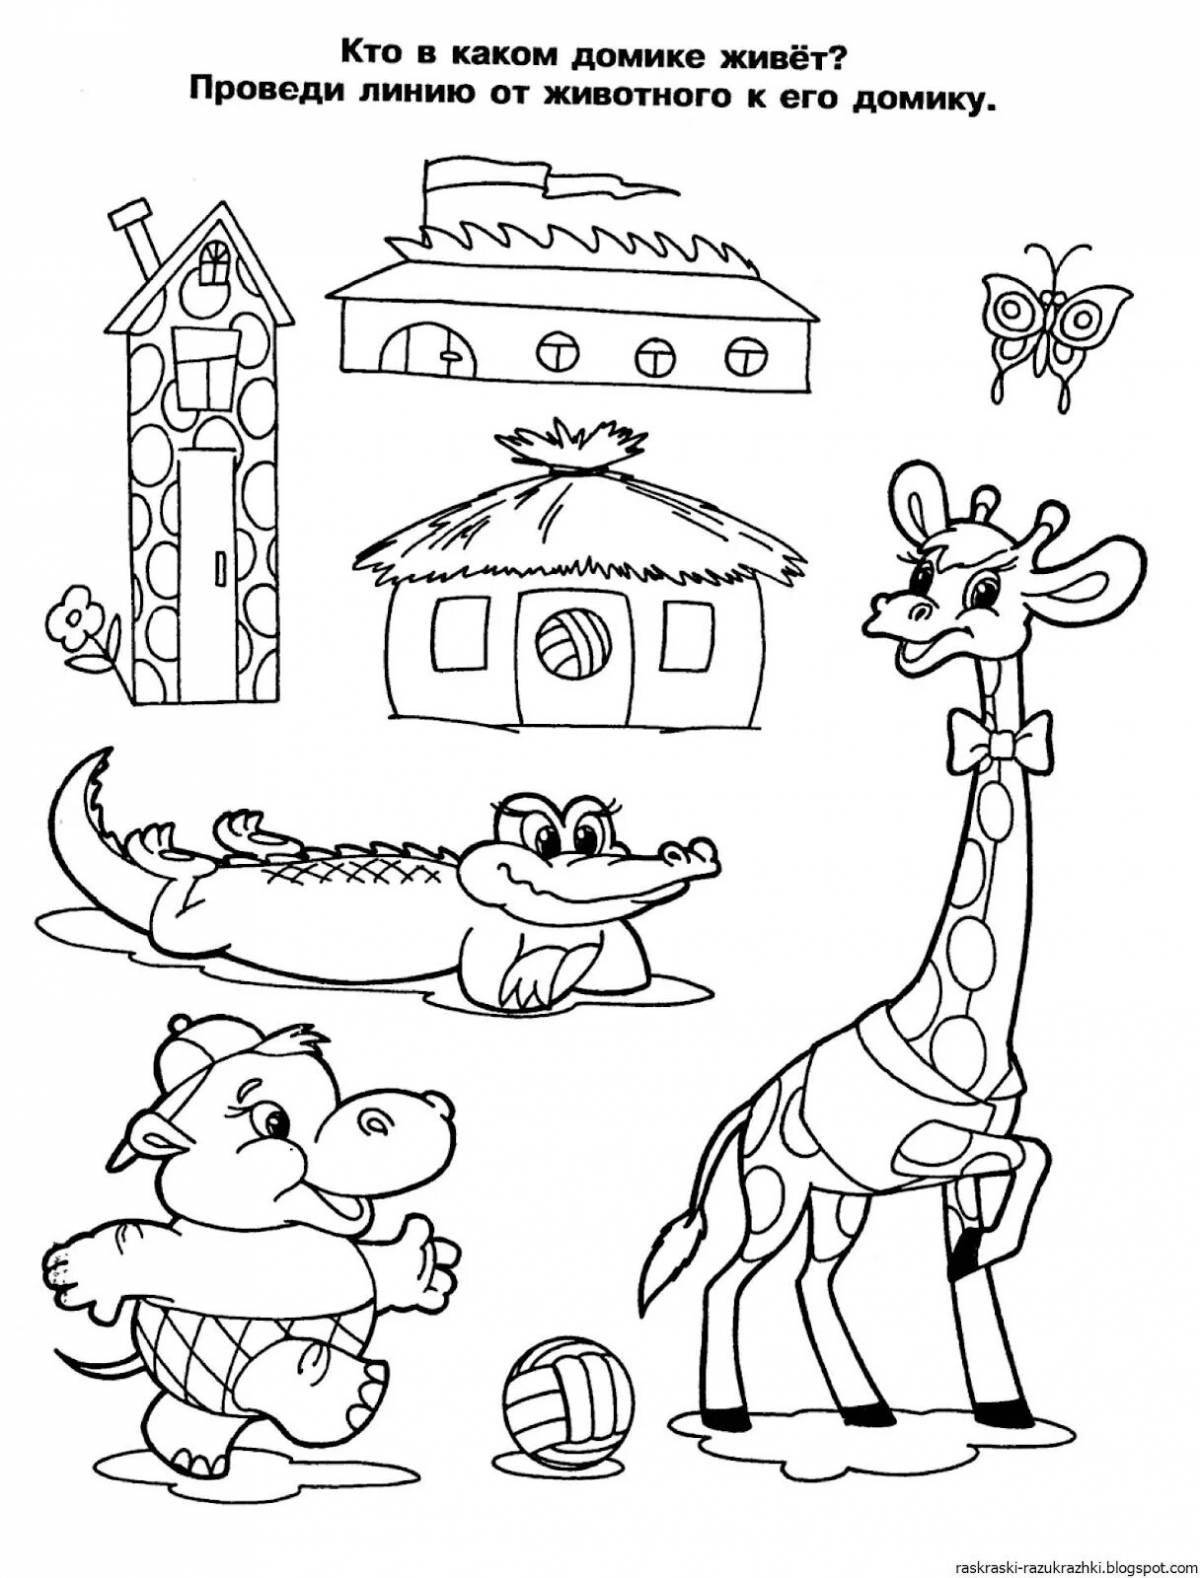 3 year old educational coloring book